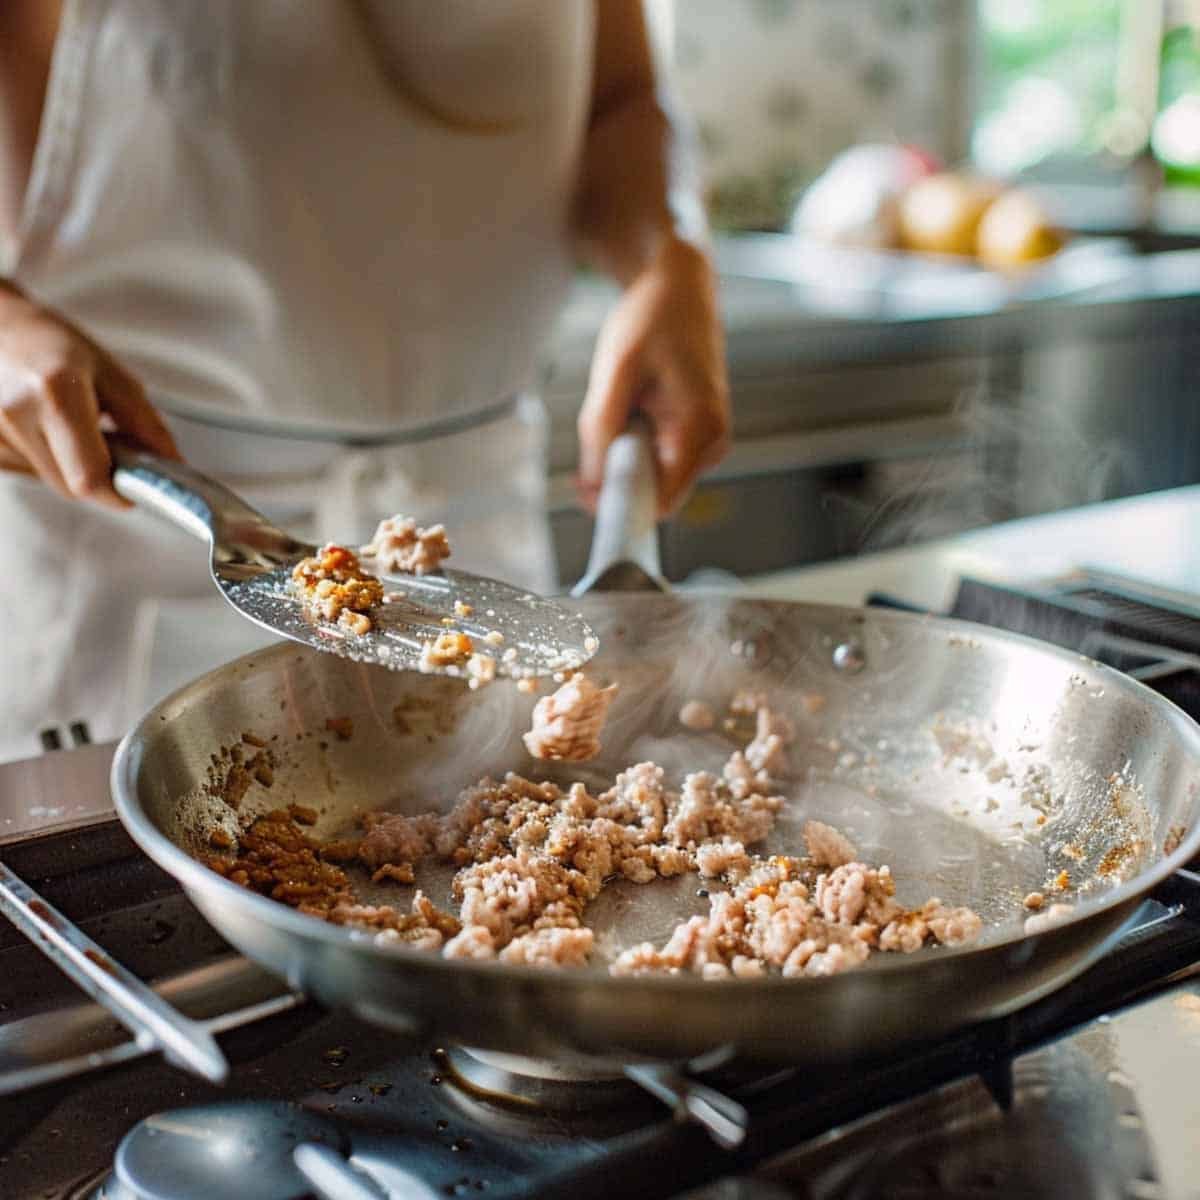 Minced pork sizzling in a stainless steel pan, being cooked for Larb, also known as Laab. The pork is being stirred with a stainless steel spoon, with visible steam rising, and seasonings like lime juice and herbs nearby on the countertop.